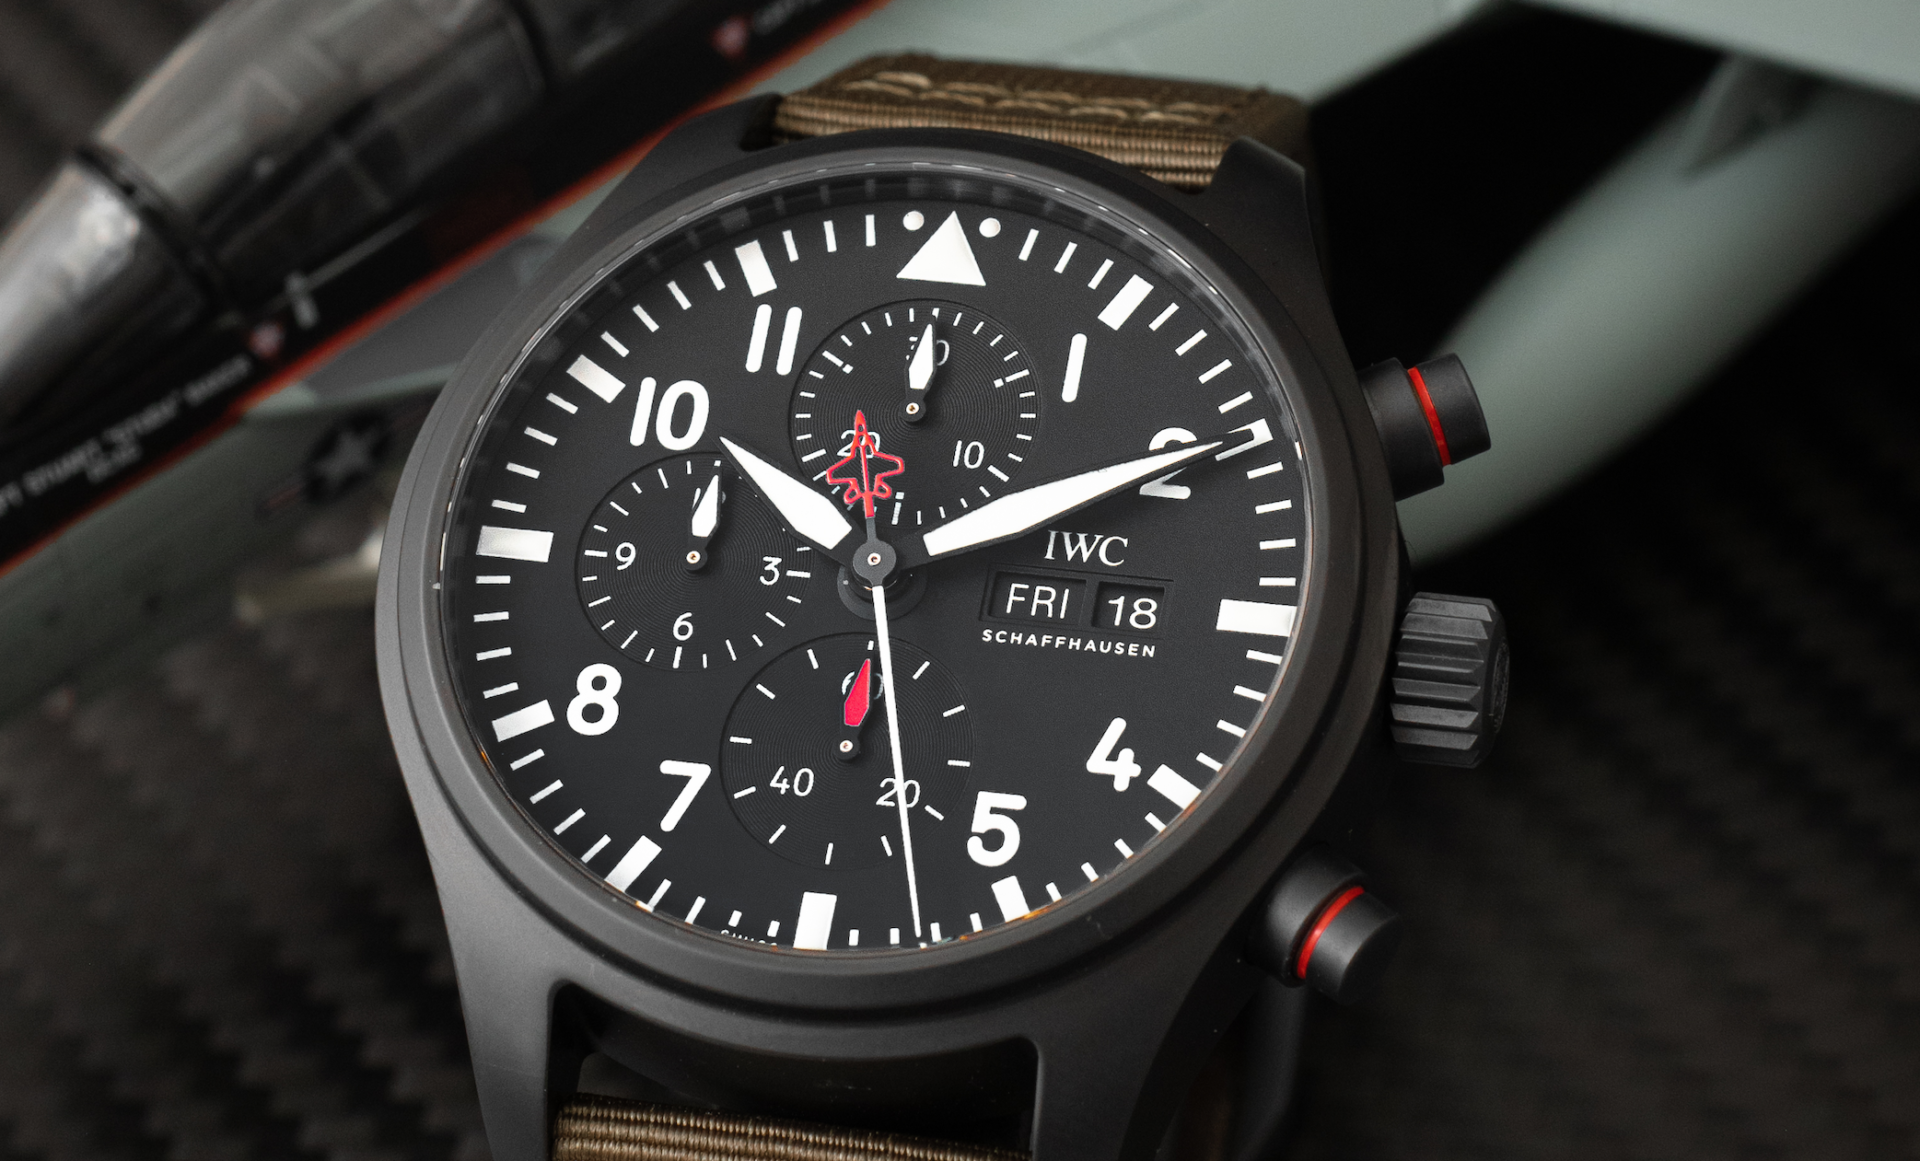 HANDS-ON: Aggressive, unrelenting and tactical, the IWC Pilot's Watch  Chronograph Top Gun Edition “SFTI” is a tool watch lover's dream - Time and  Tide Watches